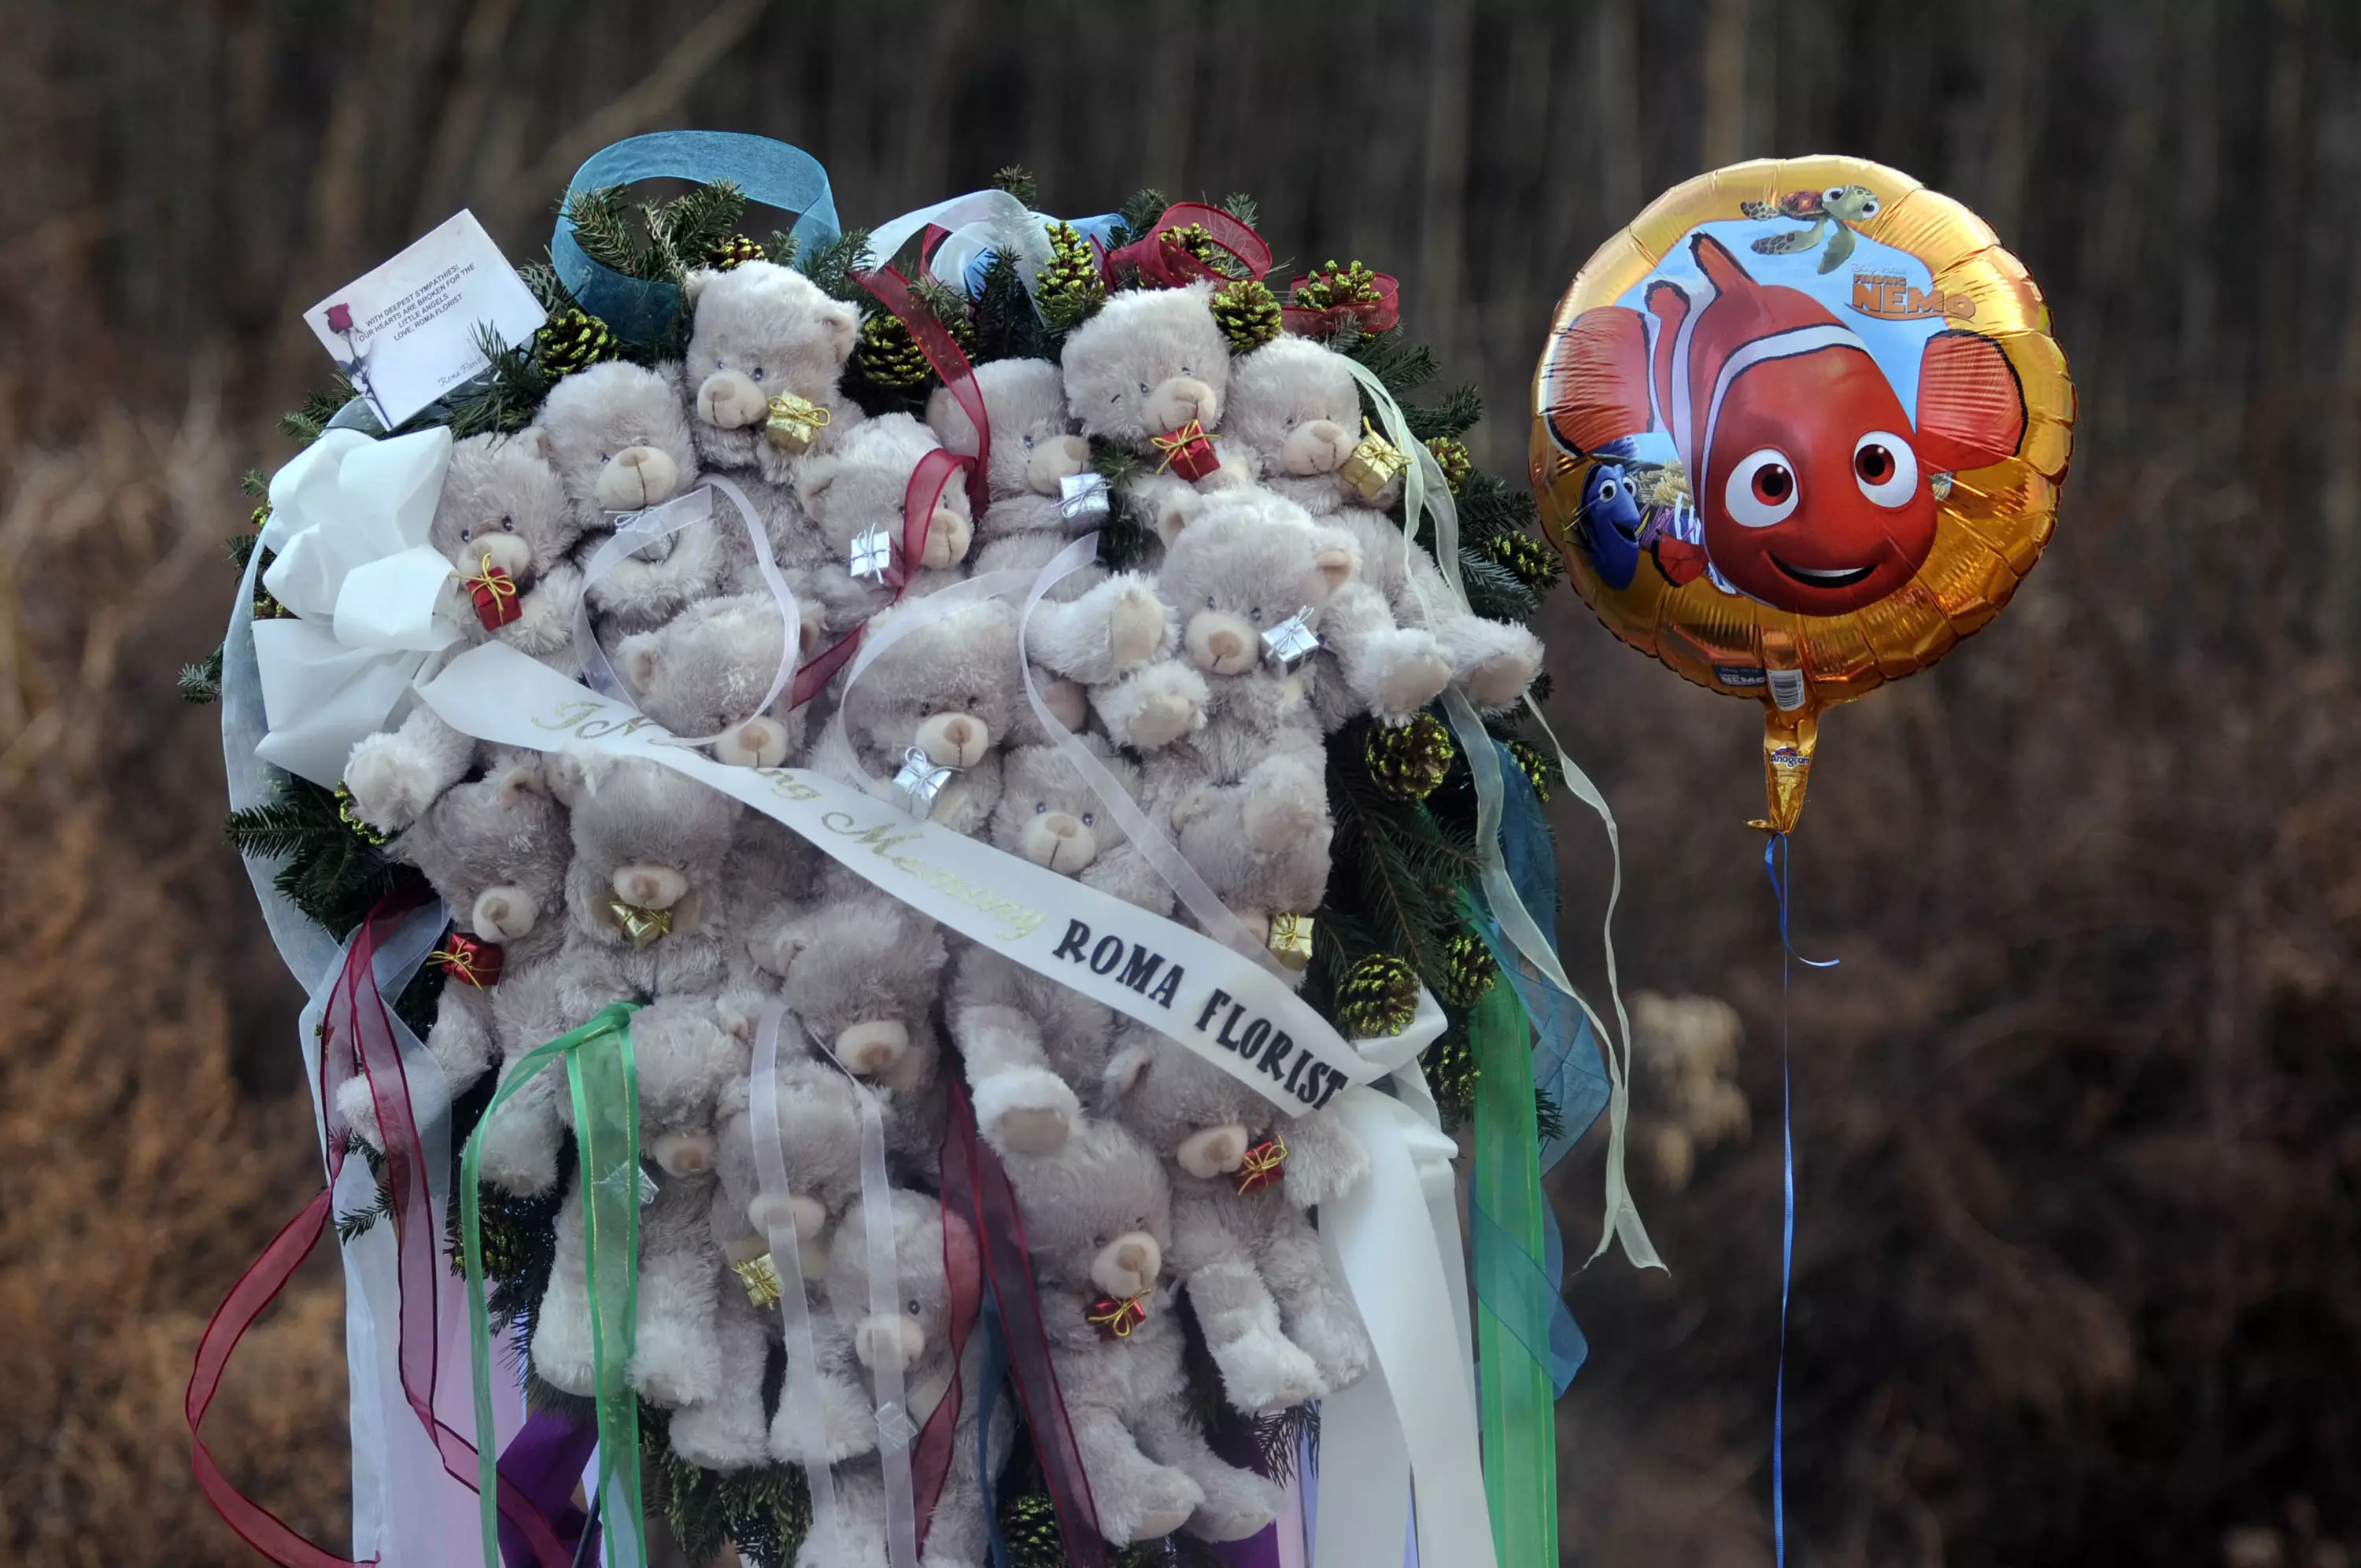 Twenty teddy bears for each of the victims of the 2012 Sandy Hook mass shooting.